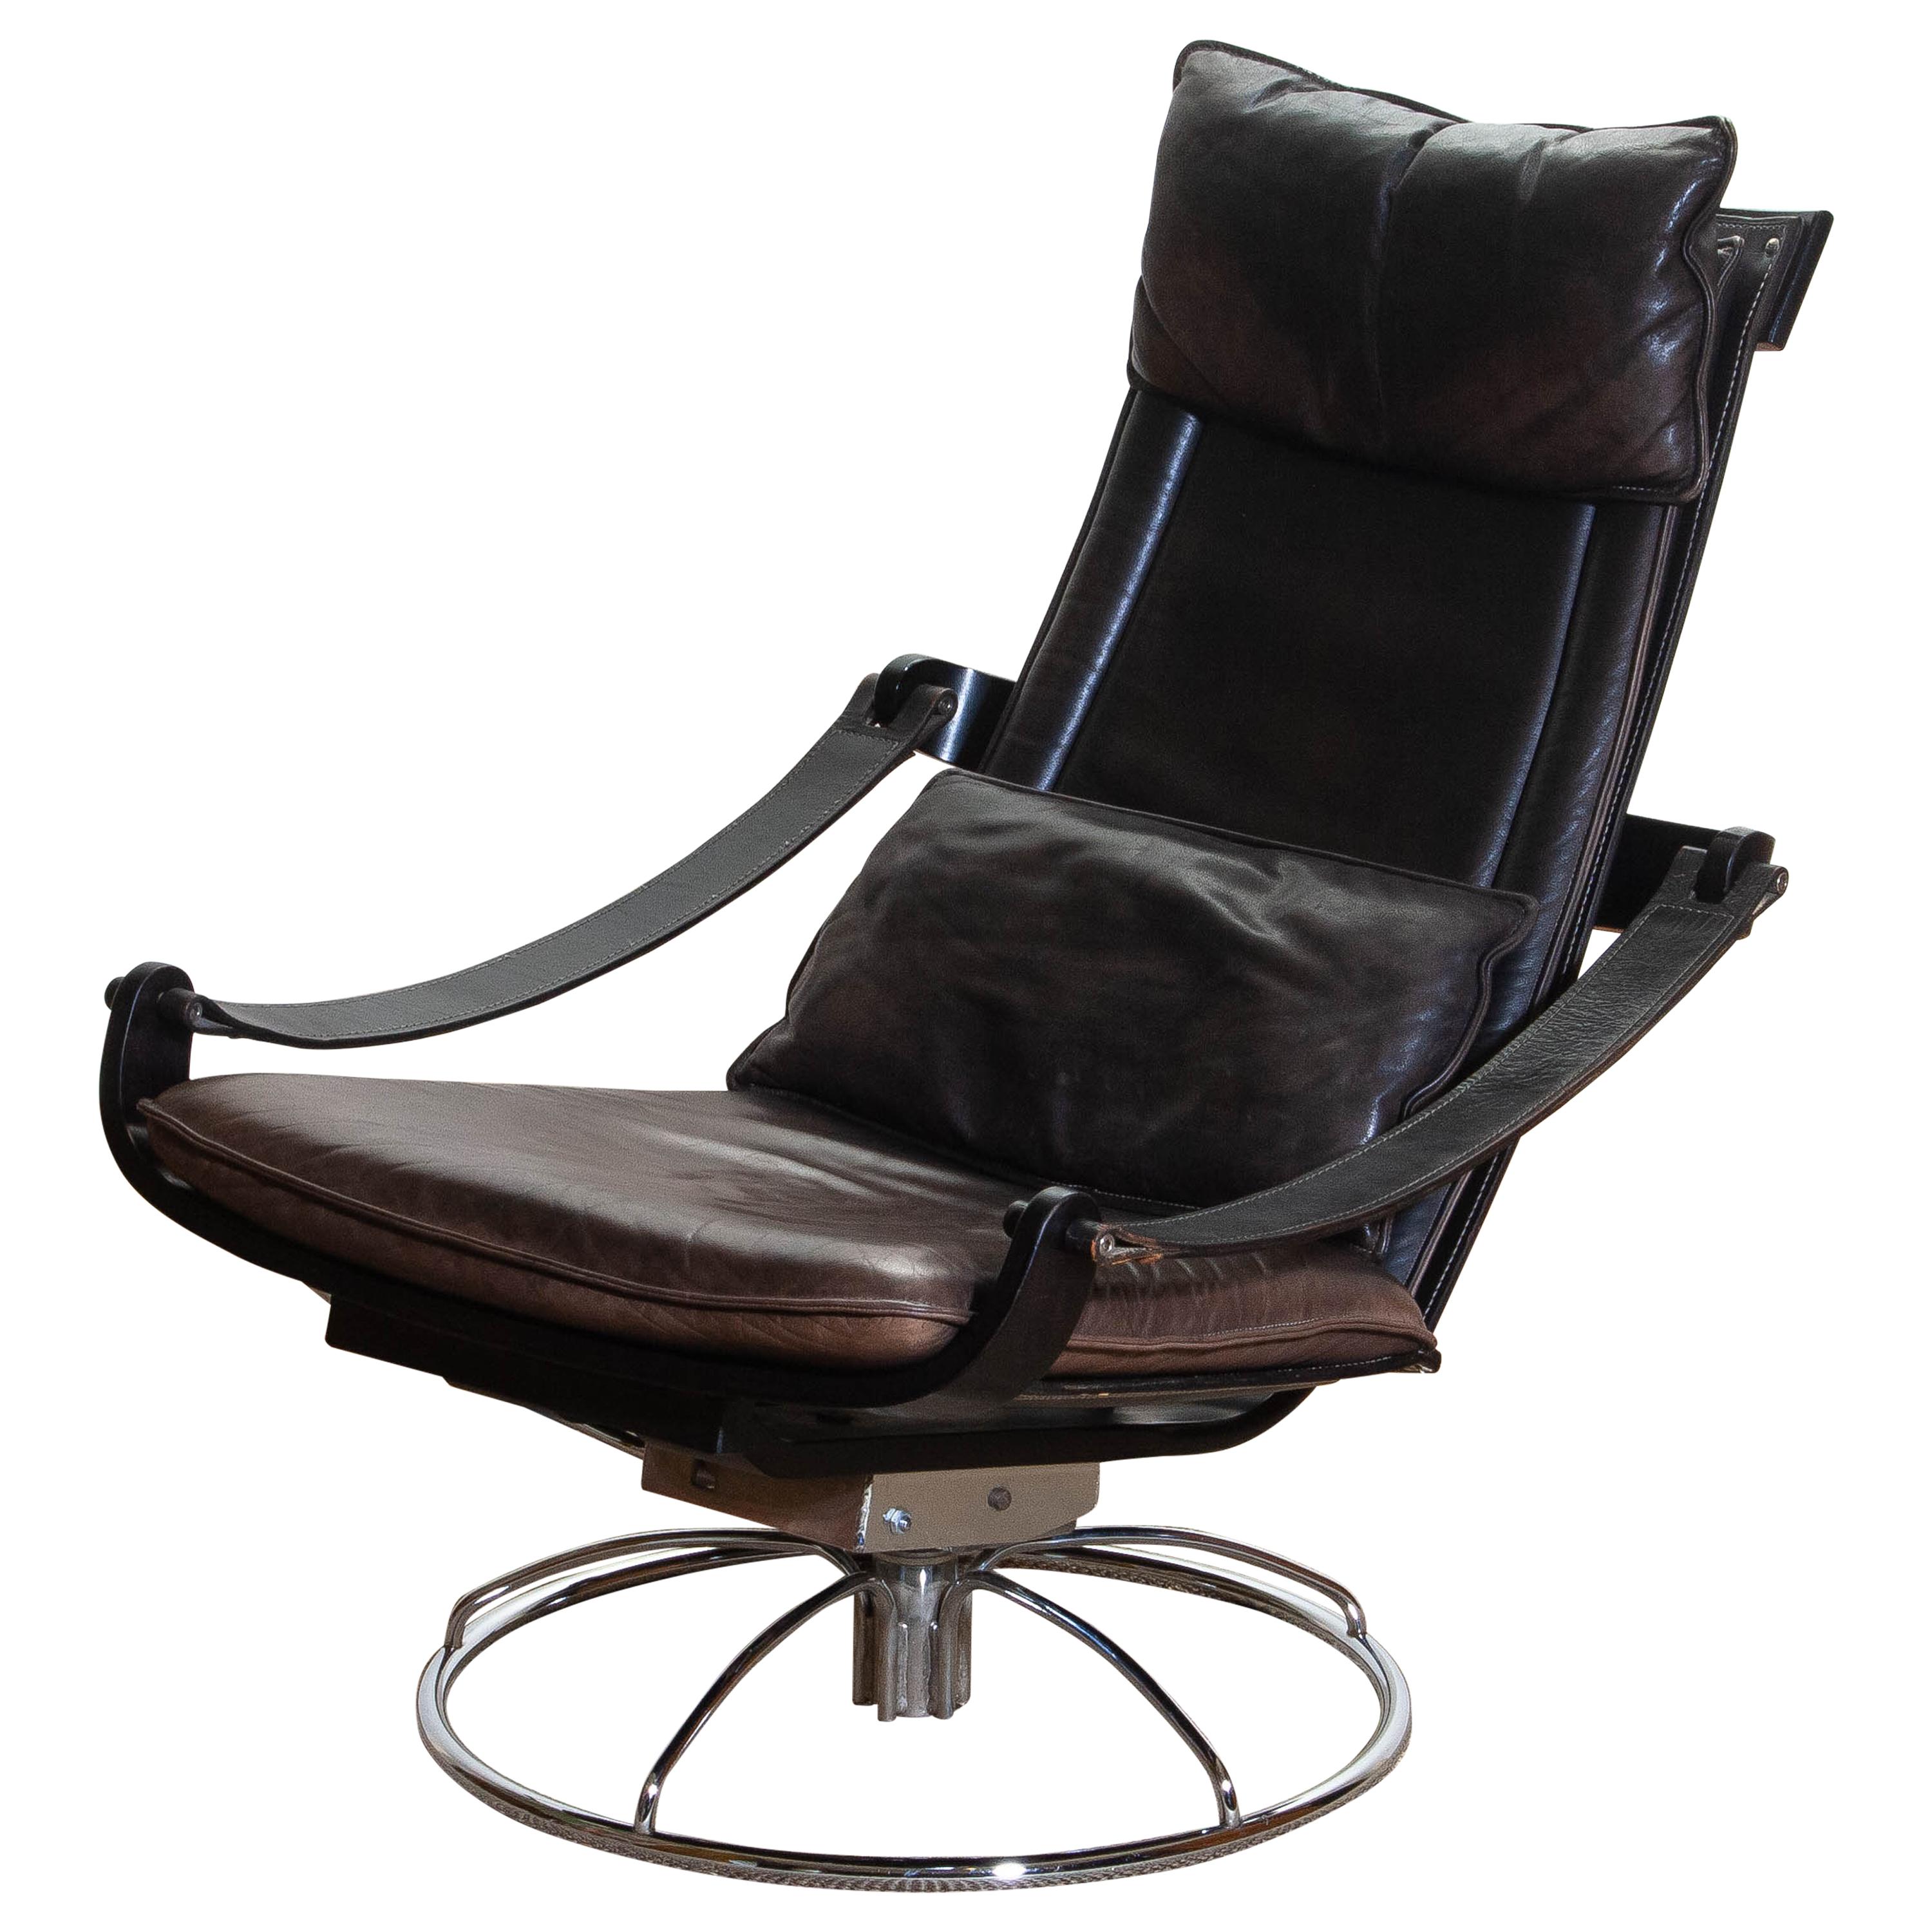 Extremely beautiful and artistic swivel and relaxing easy or lounge chair designed by Åke Fribytter for Nelo, Sweden.
This high quality chair features a plywood frame and brown leather cushions and a chromed metal base.
The armrests are made of